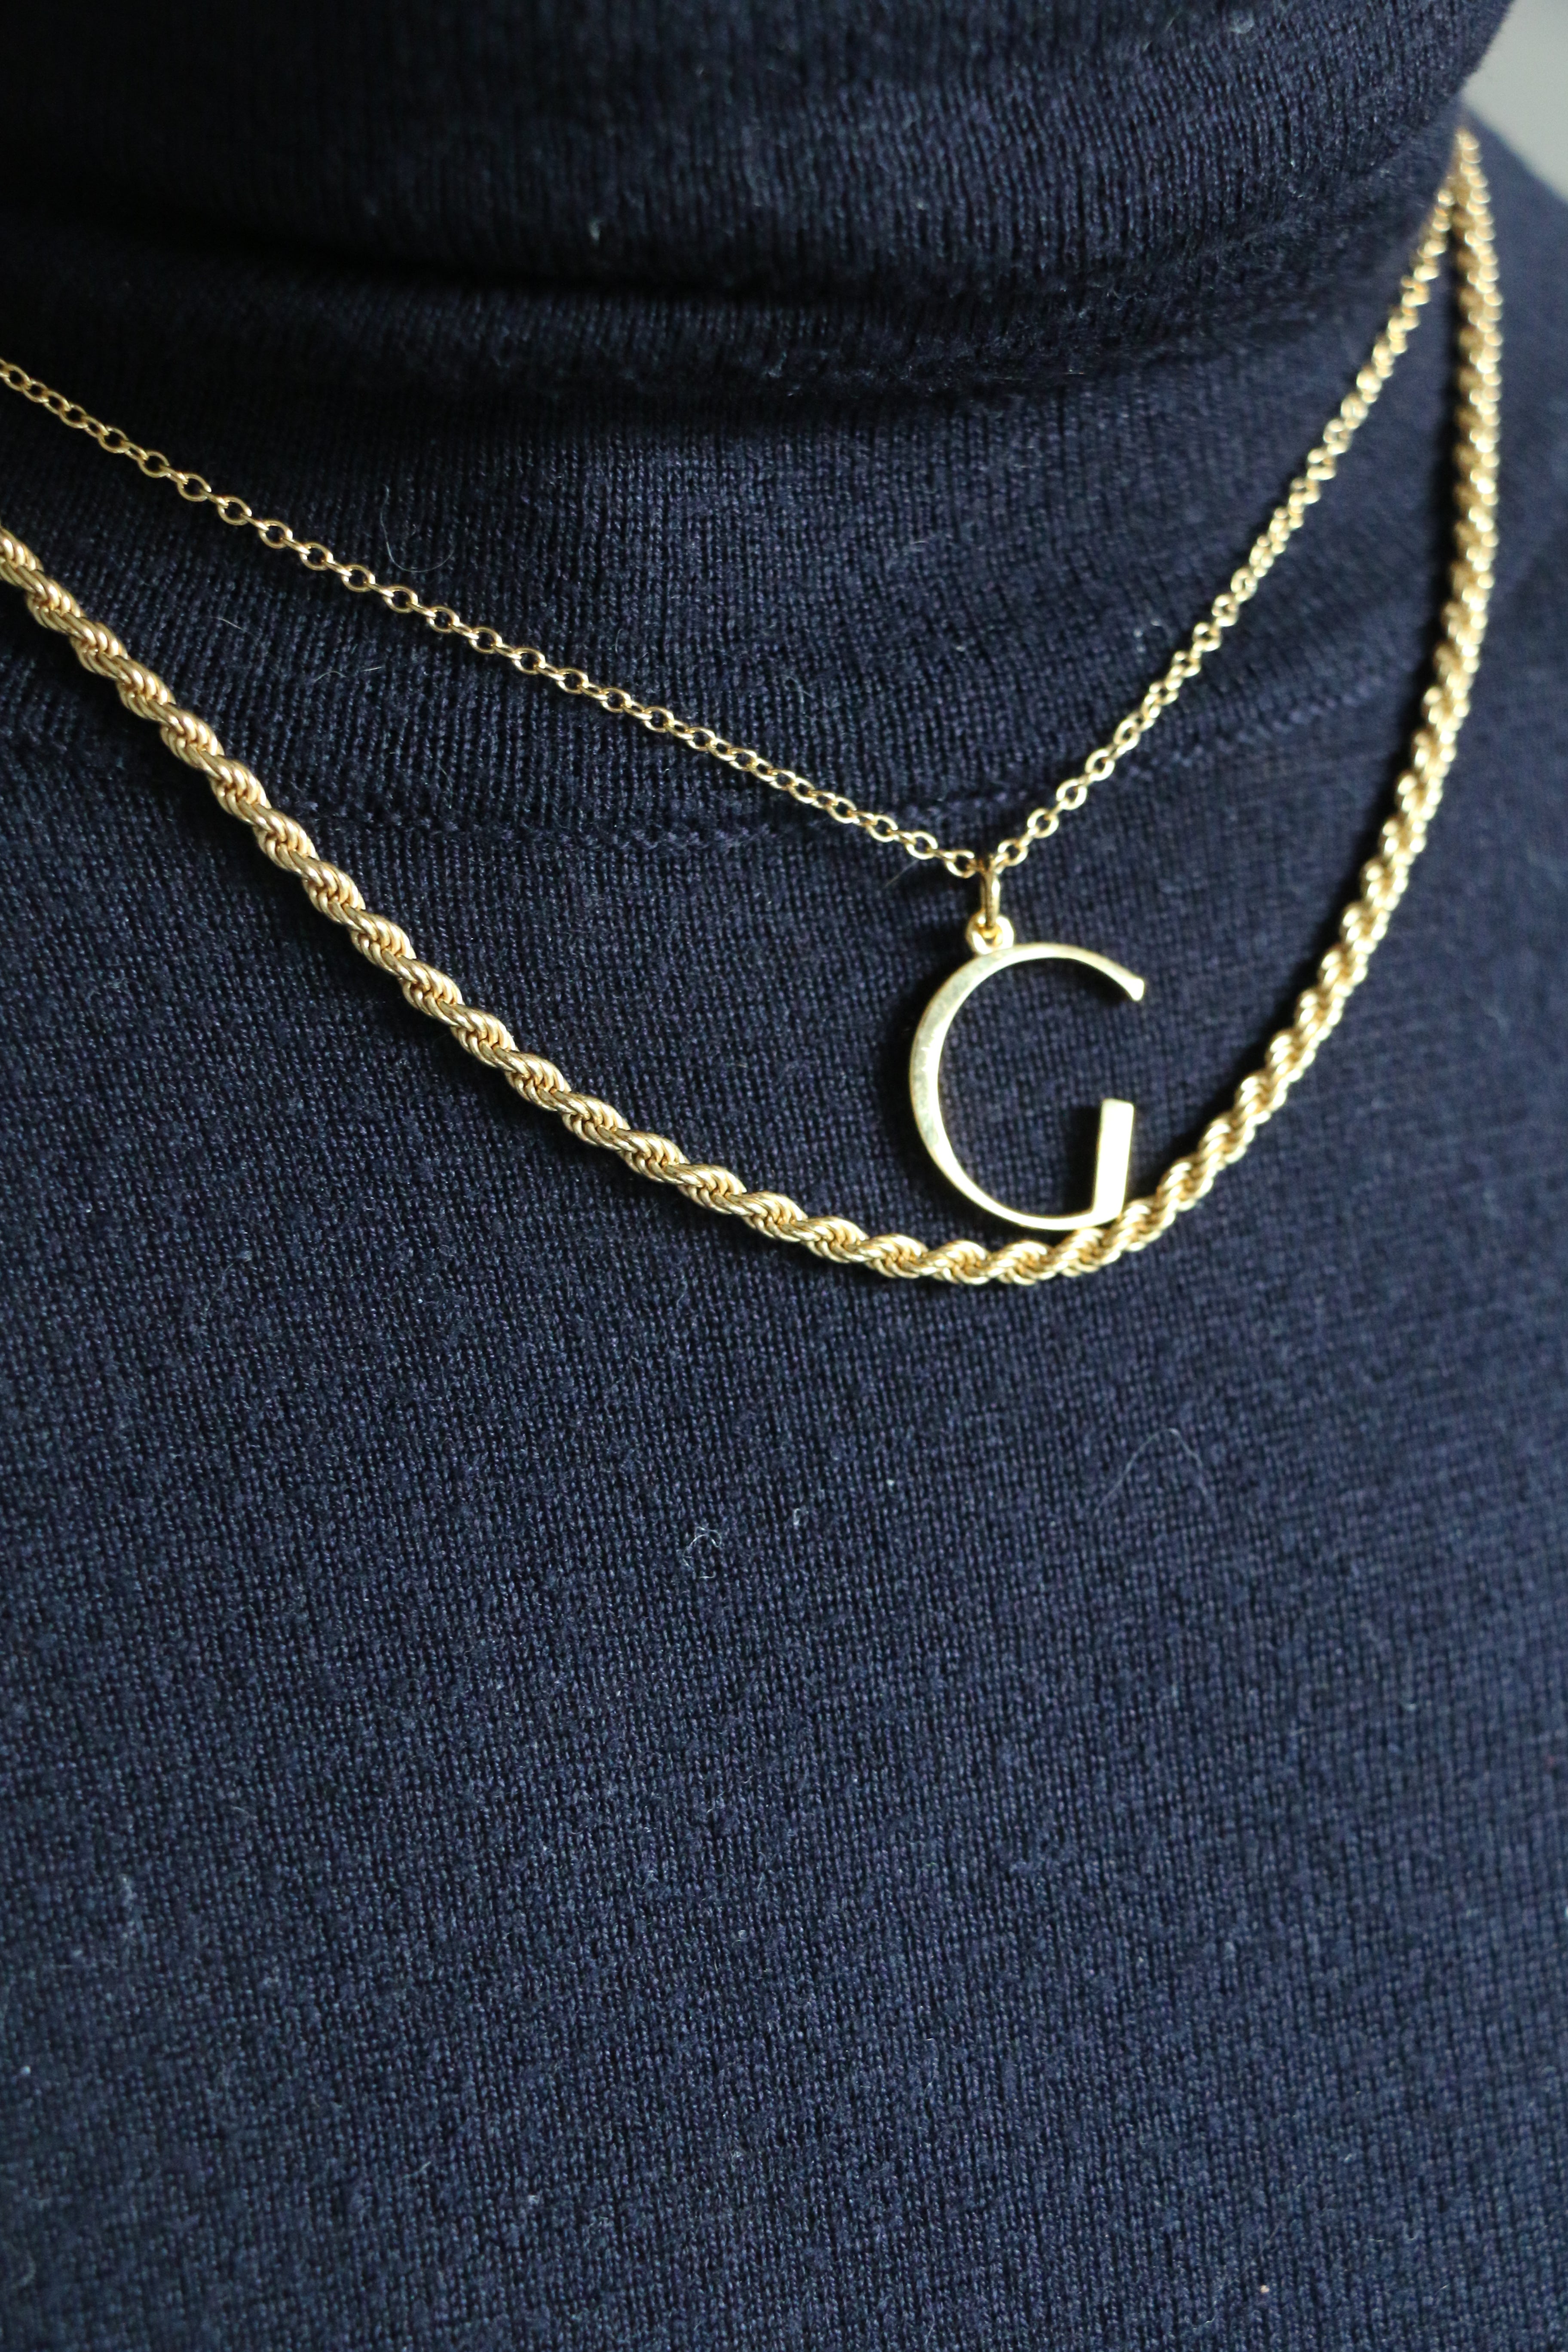 G initial Necklace and Rosalind Chain worn by model wearing blue polar neck